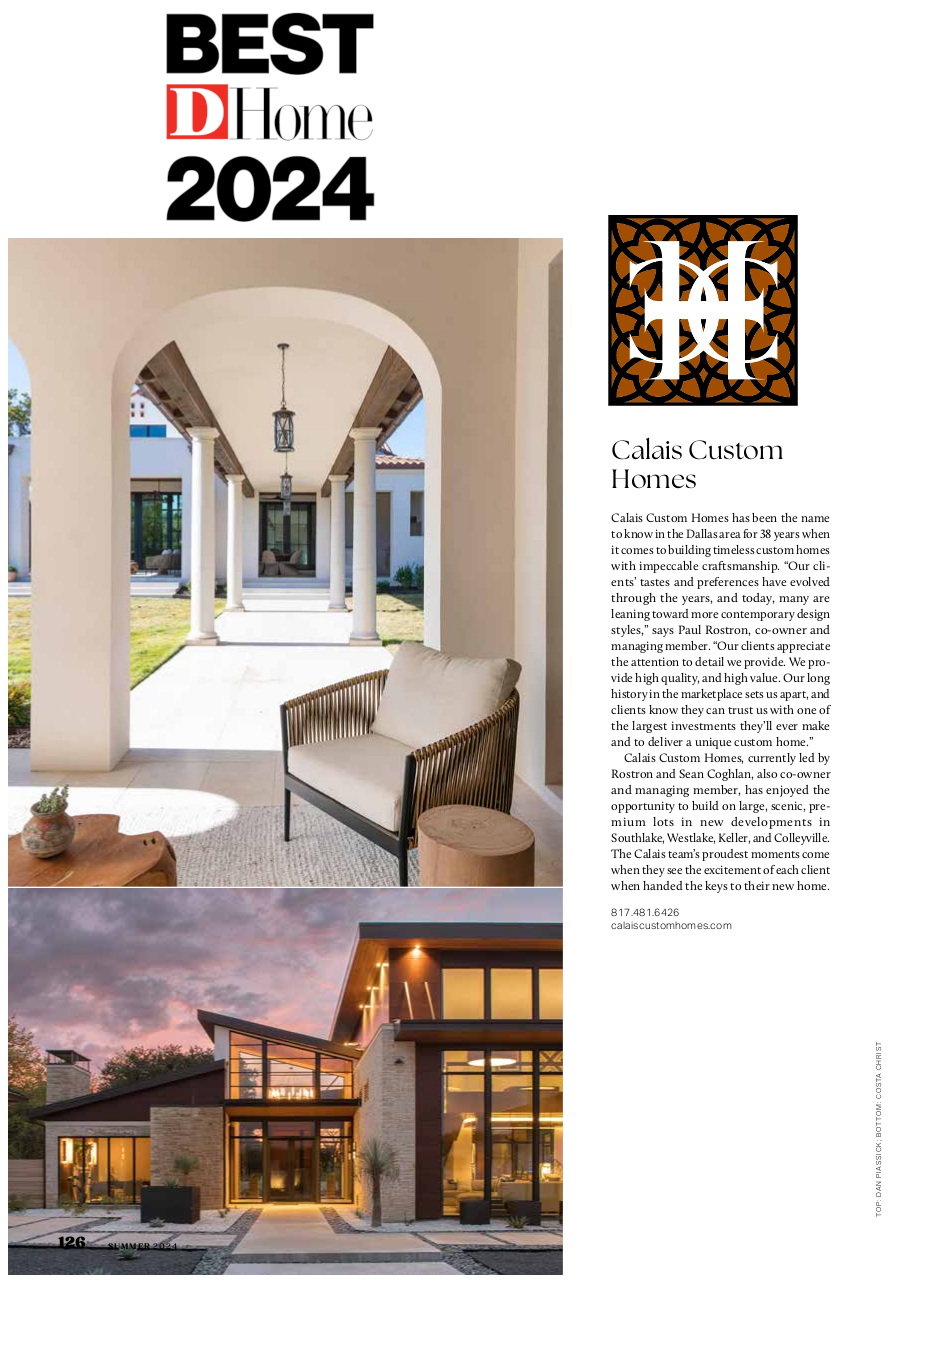 2024 DHome Best Builder Award Article